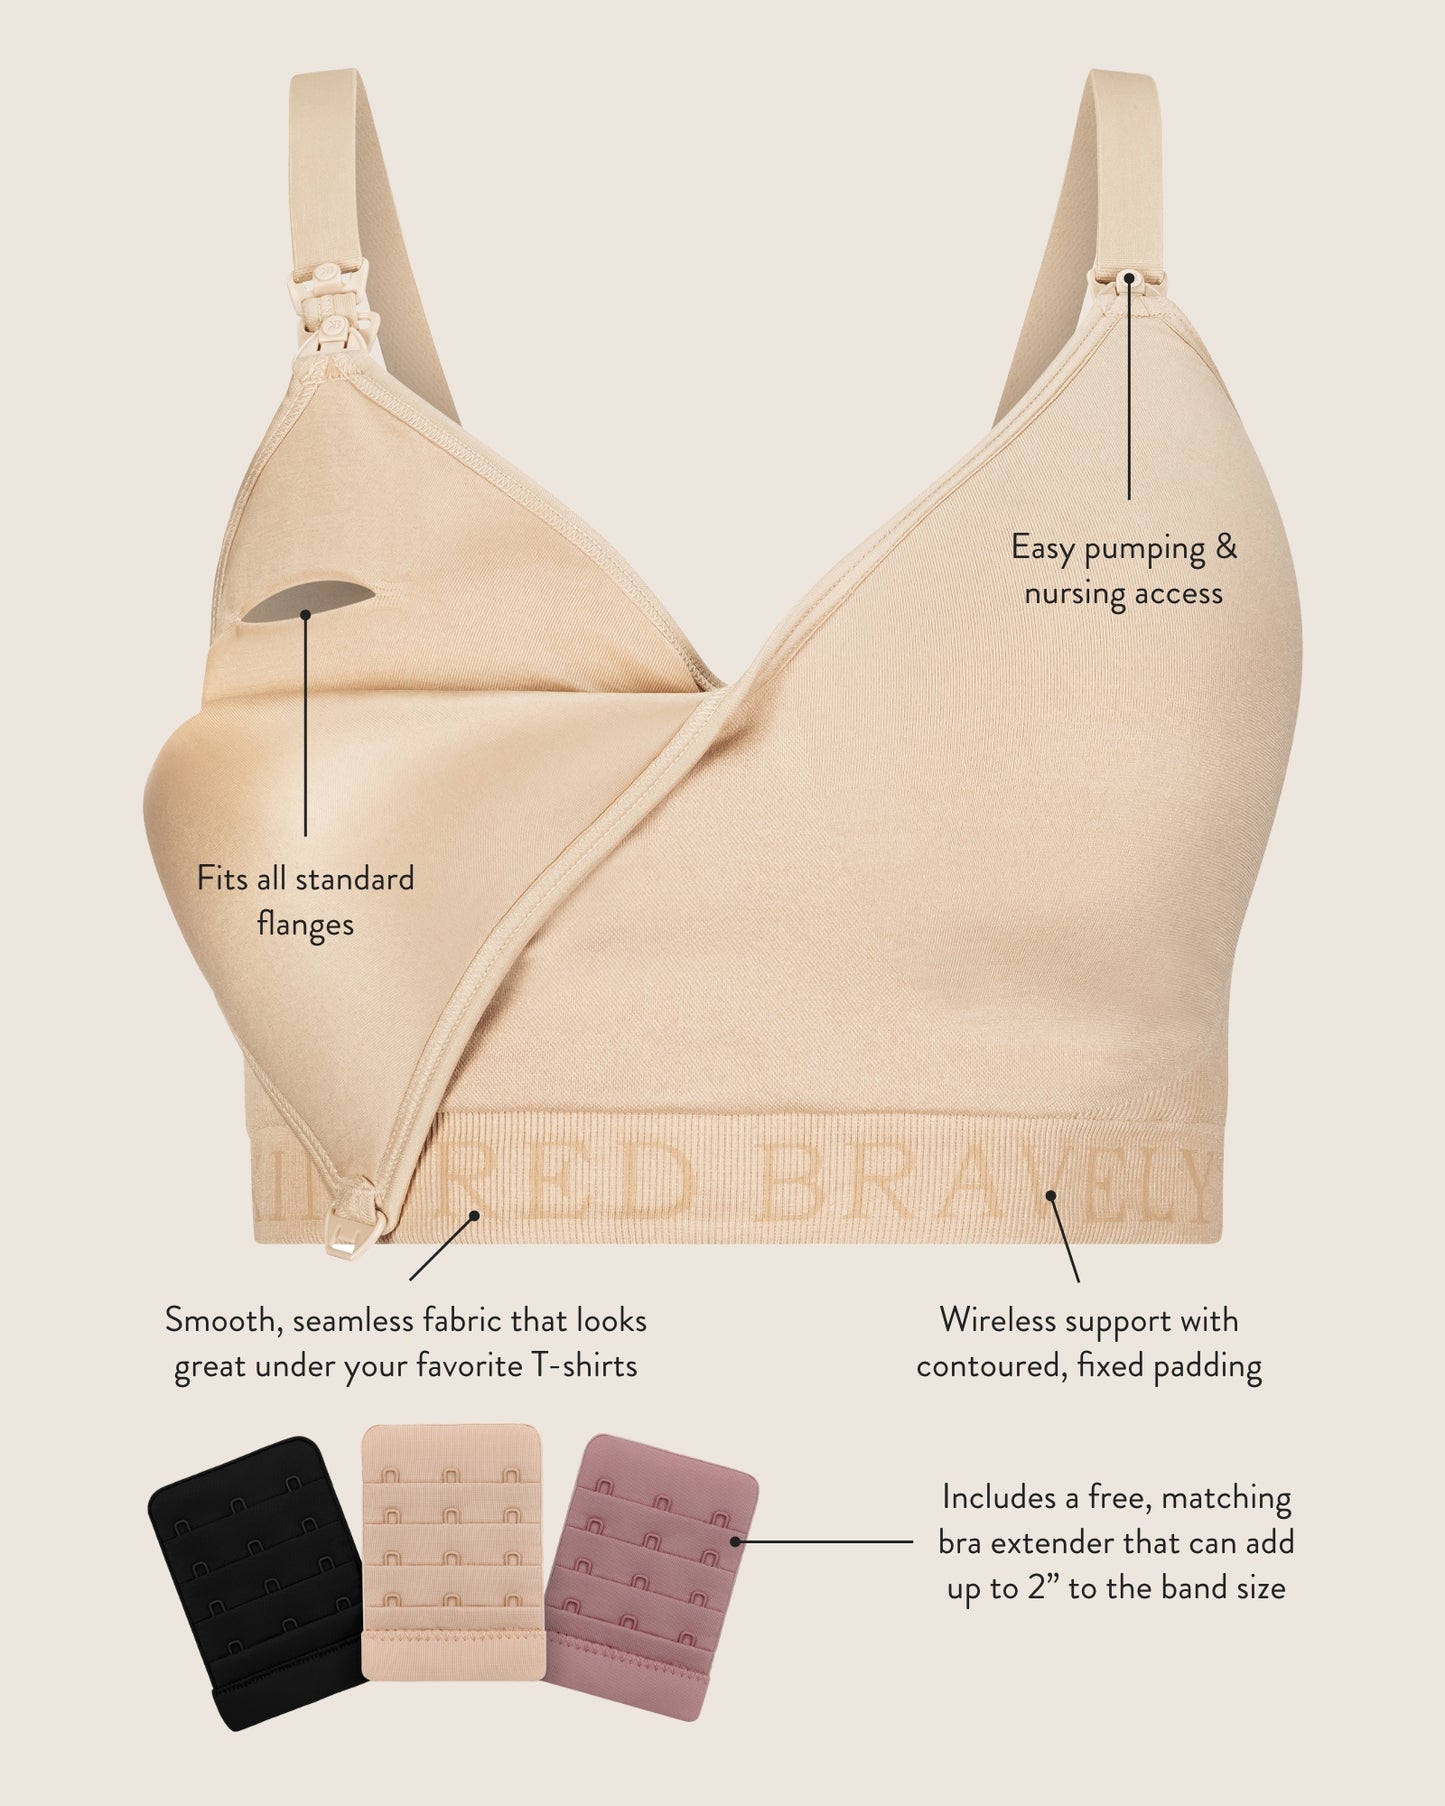 Infographic image of the Sublime Contour Hands-Free Pumping & Nursing Bra showing the benefits of the bra. Benefits include the fits all standard flanges, easy pumping & nursing access, and smooth, seamless fabric that looks great under your favorite t-shirts. 